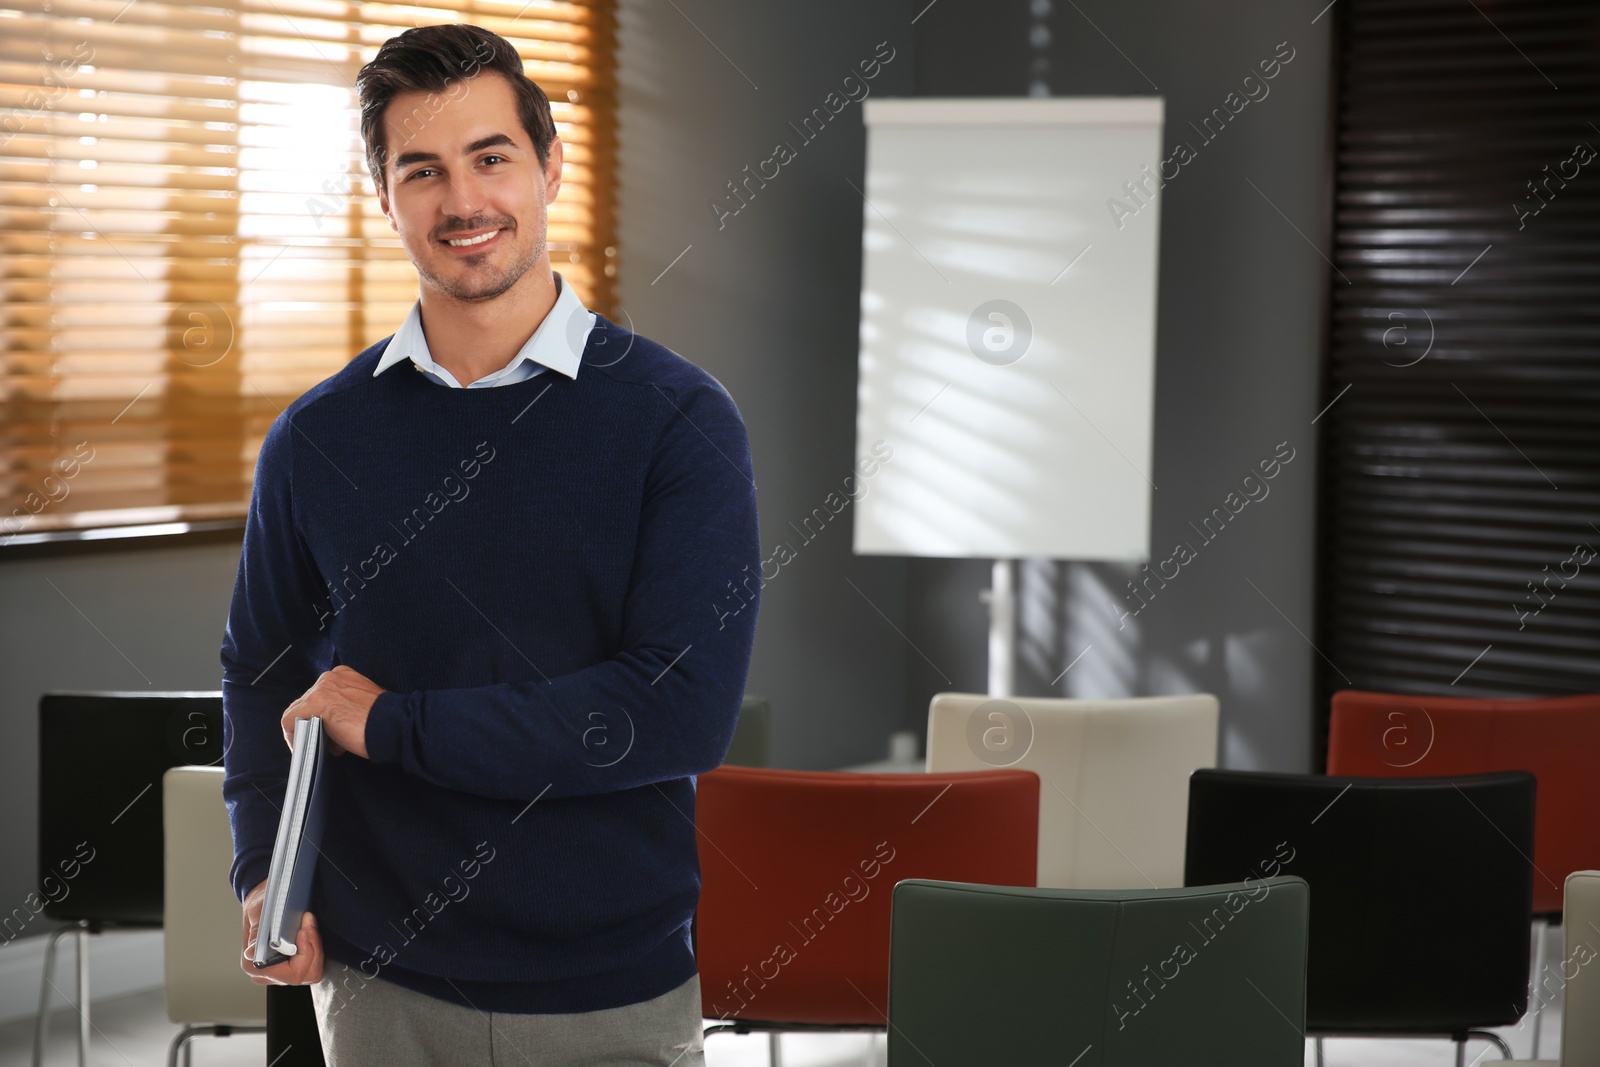 Image of Young teacher waiting for students in classroom